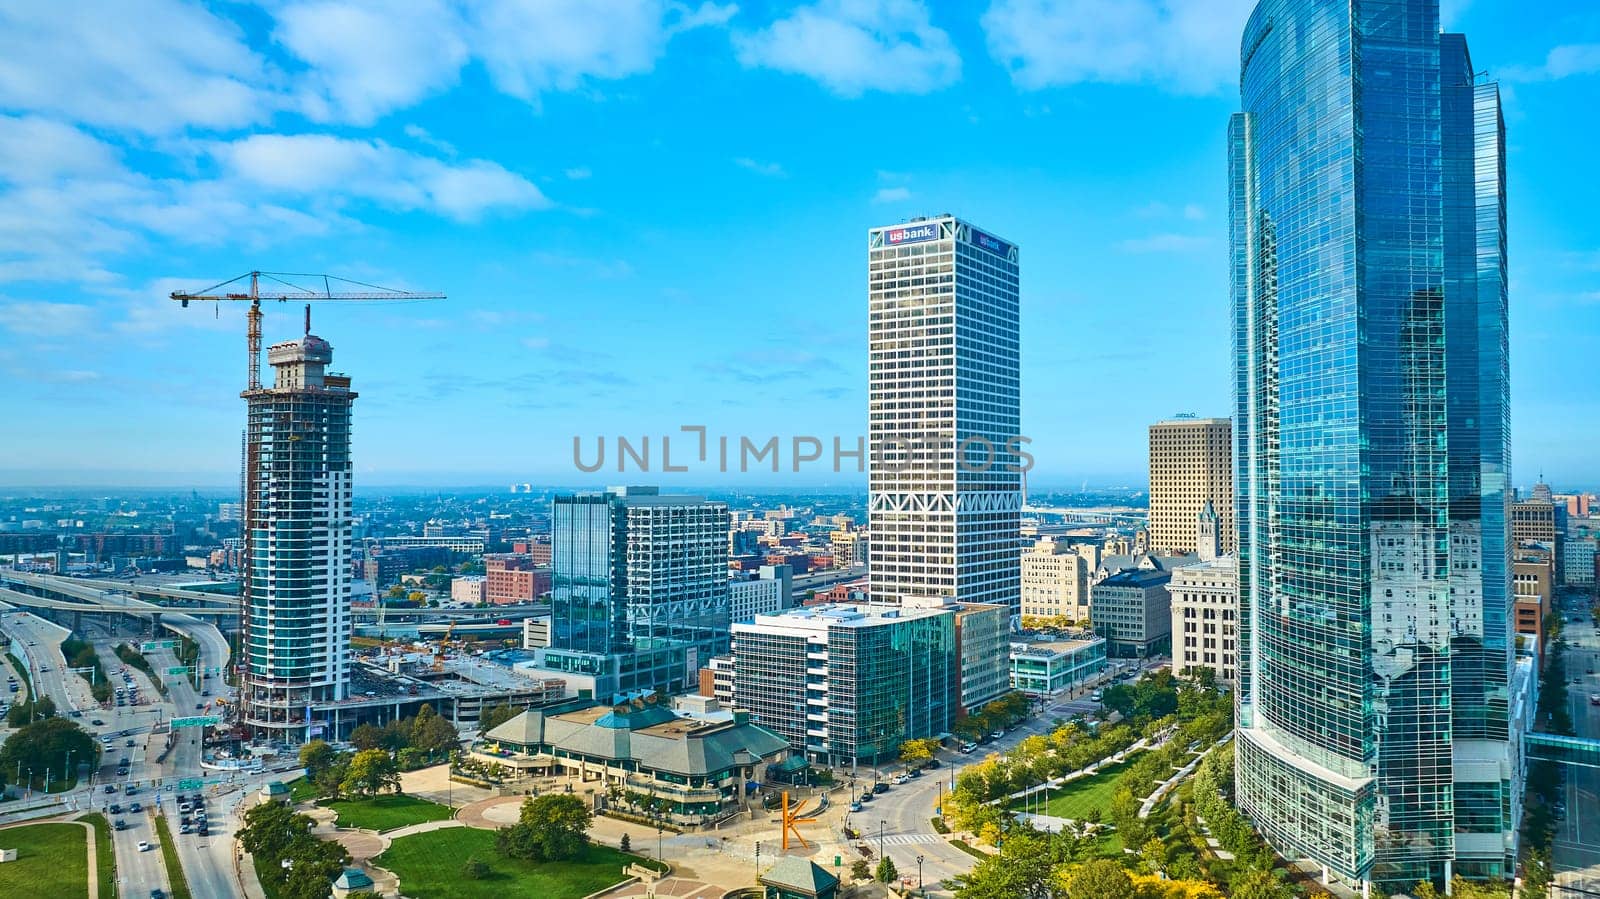 Bustling Milwaukee cityscape with towering skyscrapers, highlighted by sunlit glass facade and ongoing high-rise construction, reflecting urban growth and modernity.